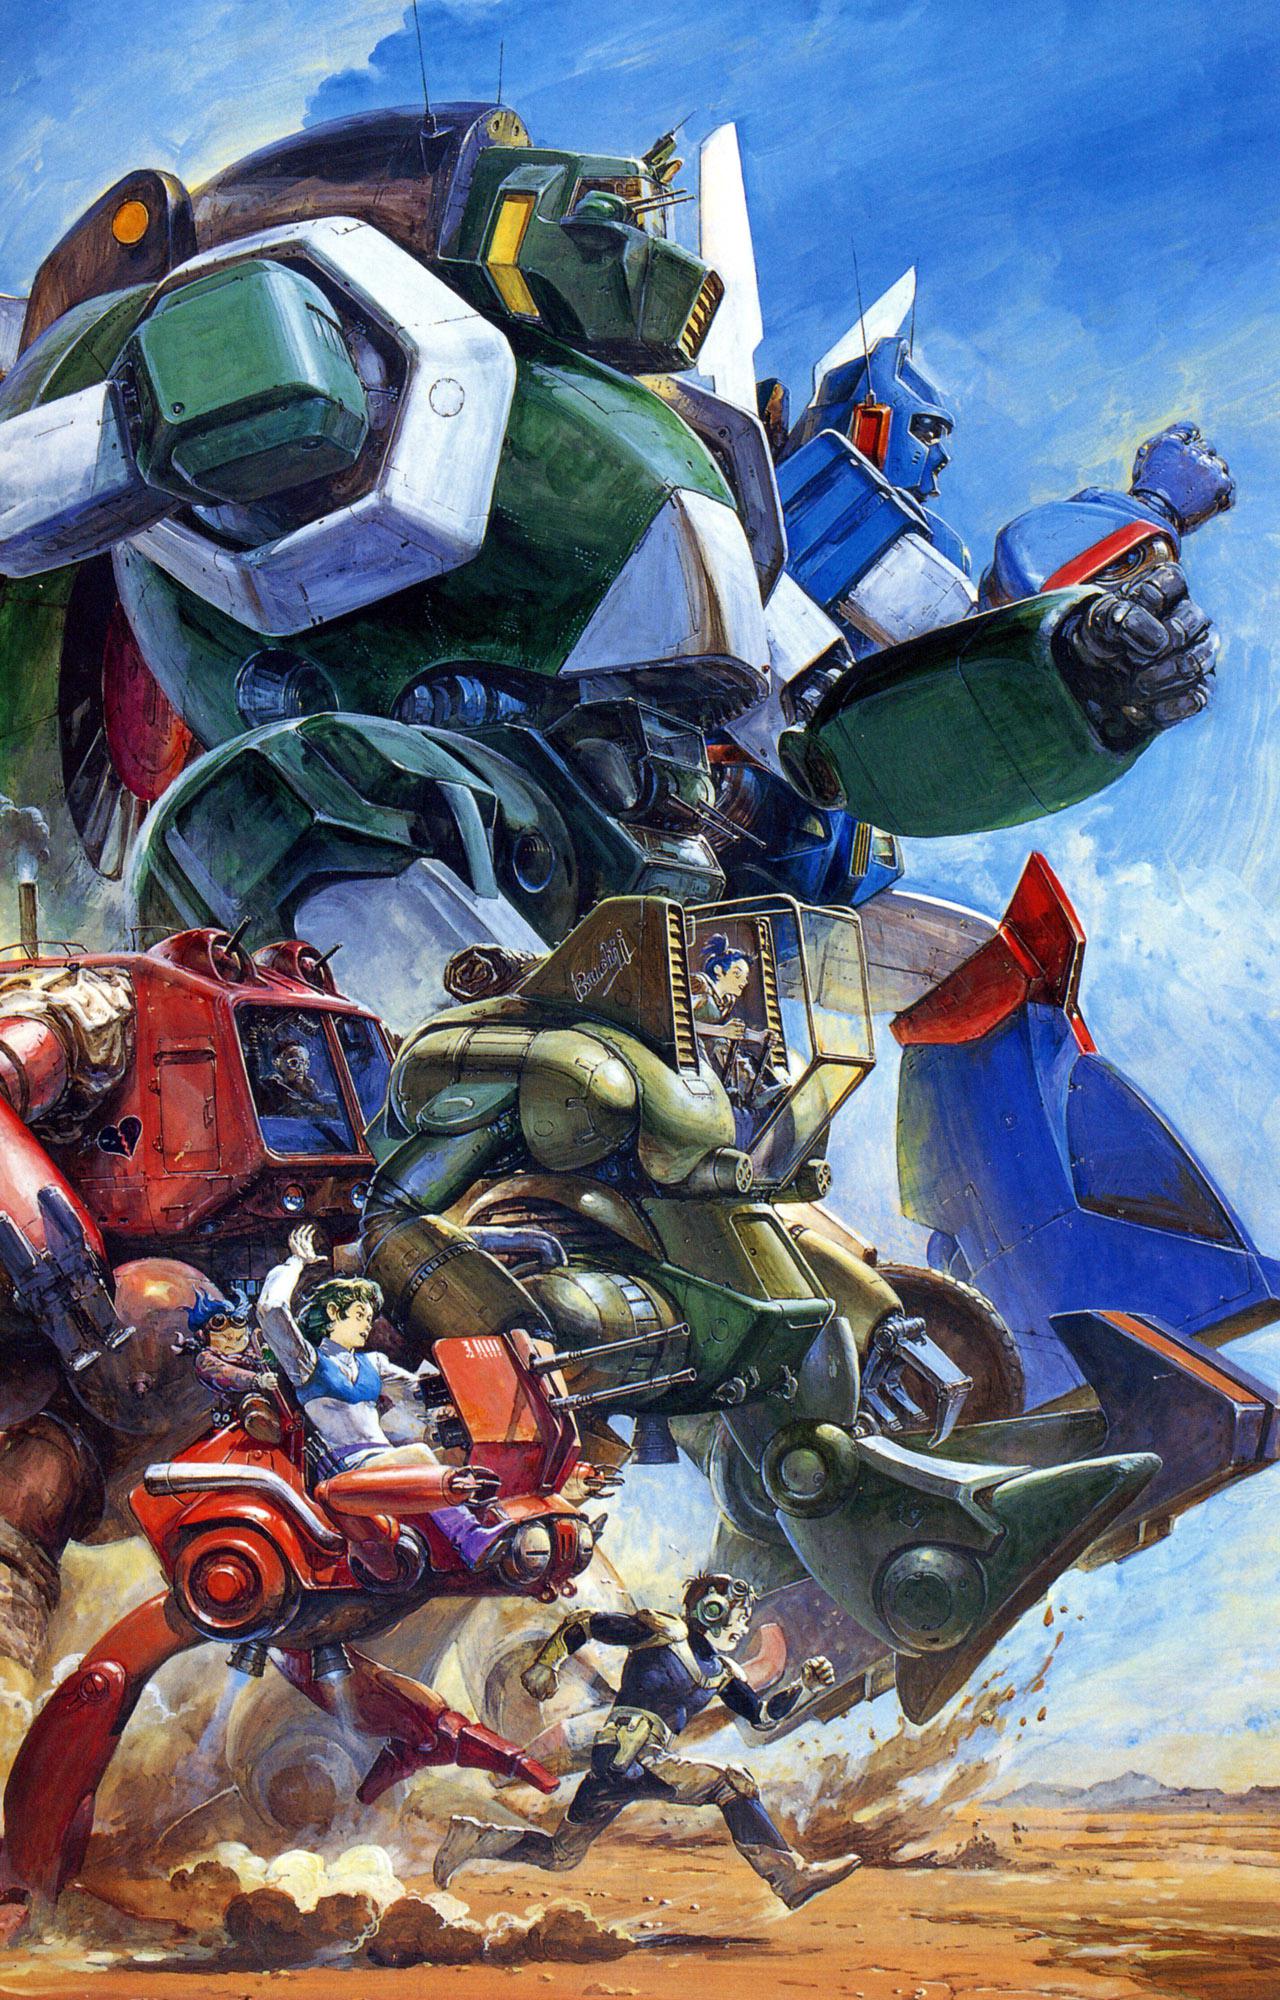 1980s_(style) 2boys 3girls blue_hair bodysuit boots brown_hair chill claws clenched_hands clenched_teeth clouds cloudy_sky damaged desert dirty dust elchi_cargo goggles graffiti green_hair gun headgear highres hover_vehicle jiron_amos machine_gun machinery mecha mechanical_arms multiple_boys multiple_girls official_art pipe ponytail production_art promotional_art racing radio_antenna rag_uralo realistic retro_artstyle rock running scan science_fiction sentou_mecha_xabungle sky smoke takani_yoshiyuki teeth thrusters traditional_media turret walker walker_gallia weapon xabungle_(mecha)